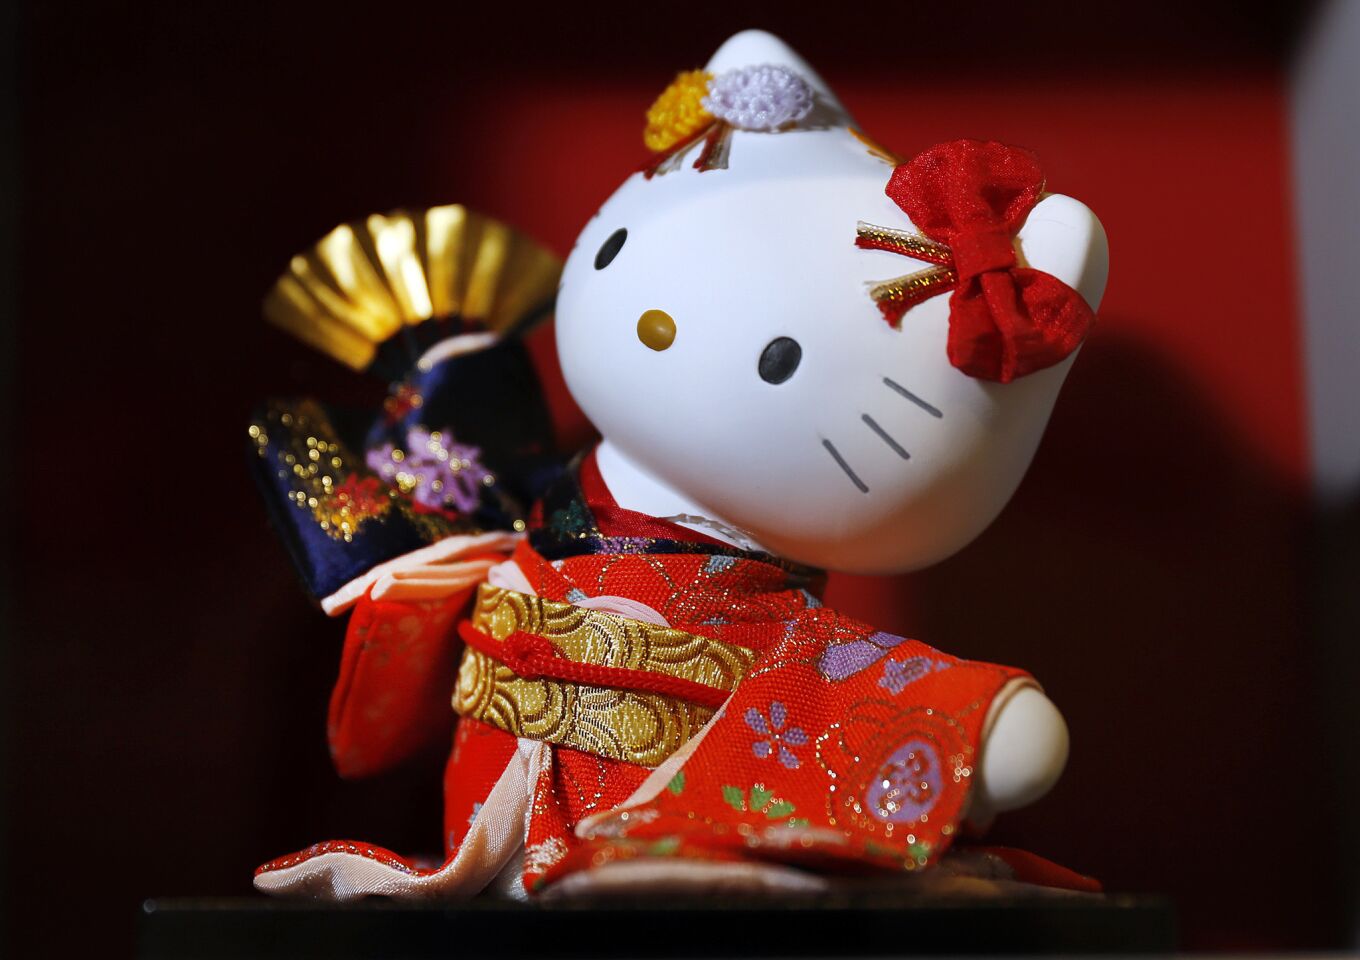 A Hello Kitty figurine on display at the Japanese American National Museum's "Hello! Exploring the Supercute World of Hello Kitty" exhibition. The retrospective devoted to Hello Kitty opened in October and runs through April 26.